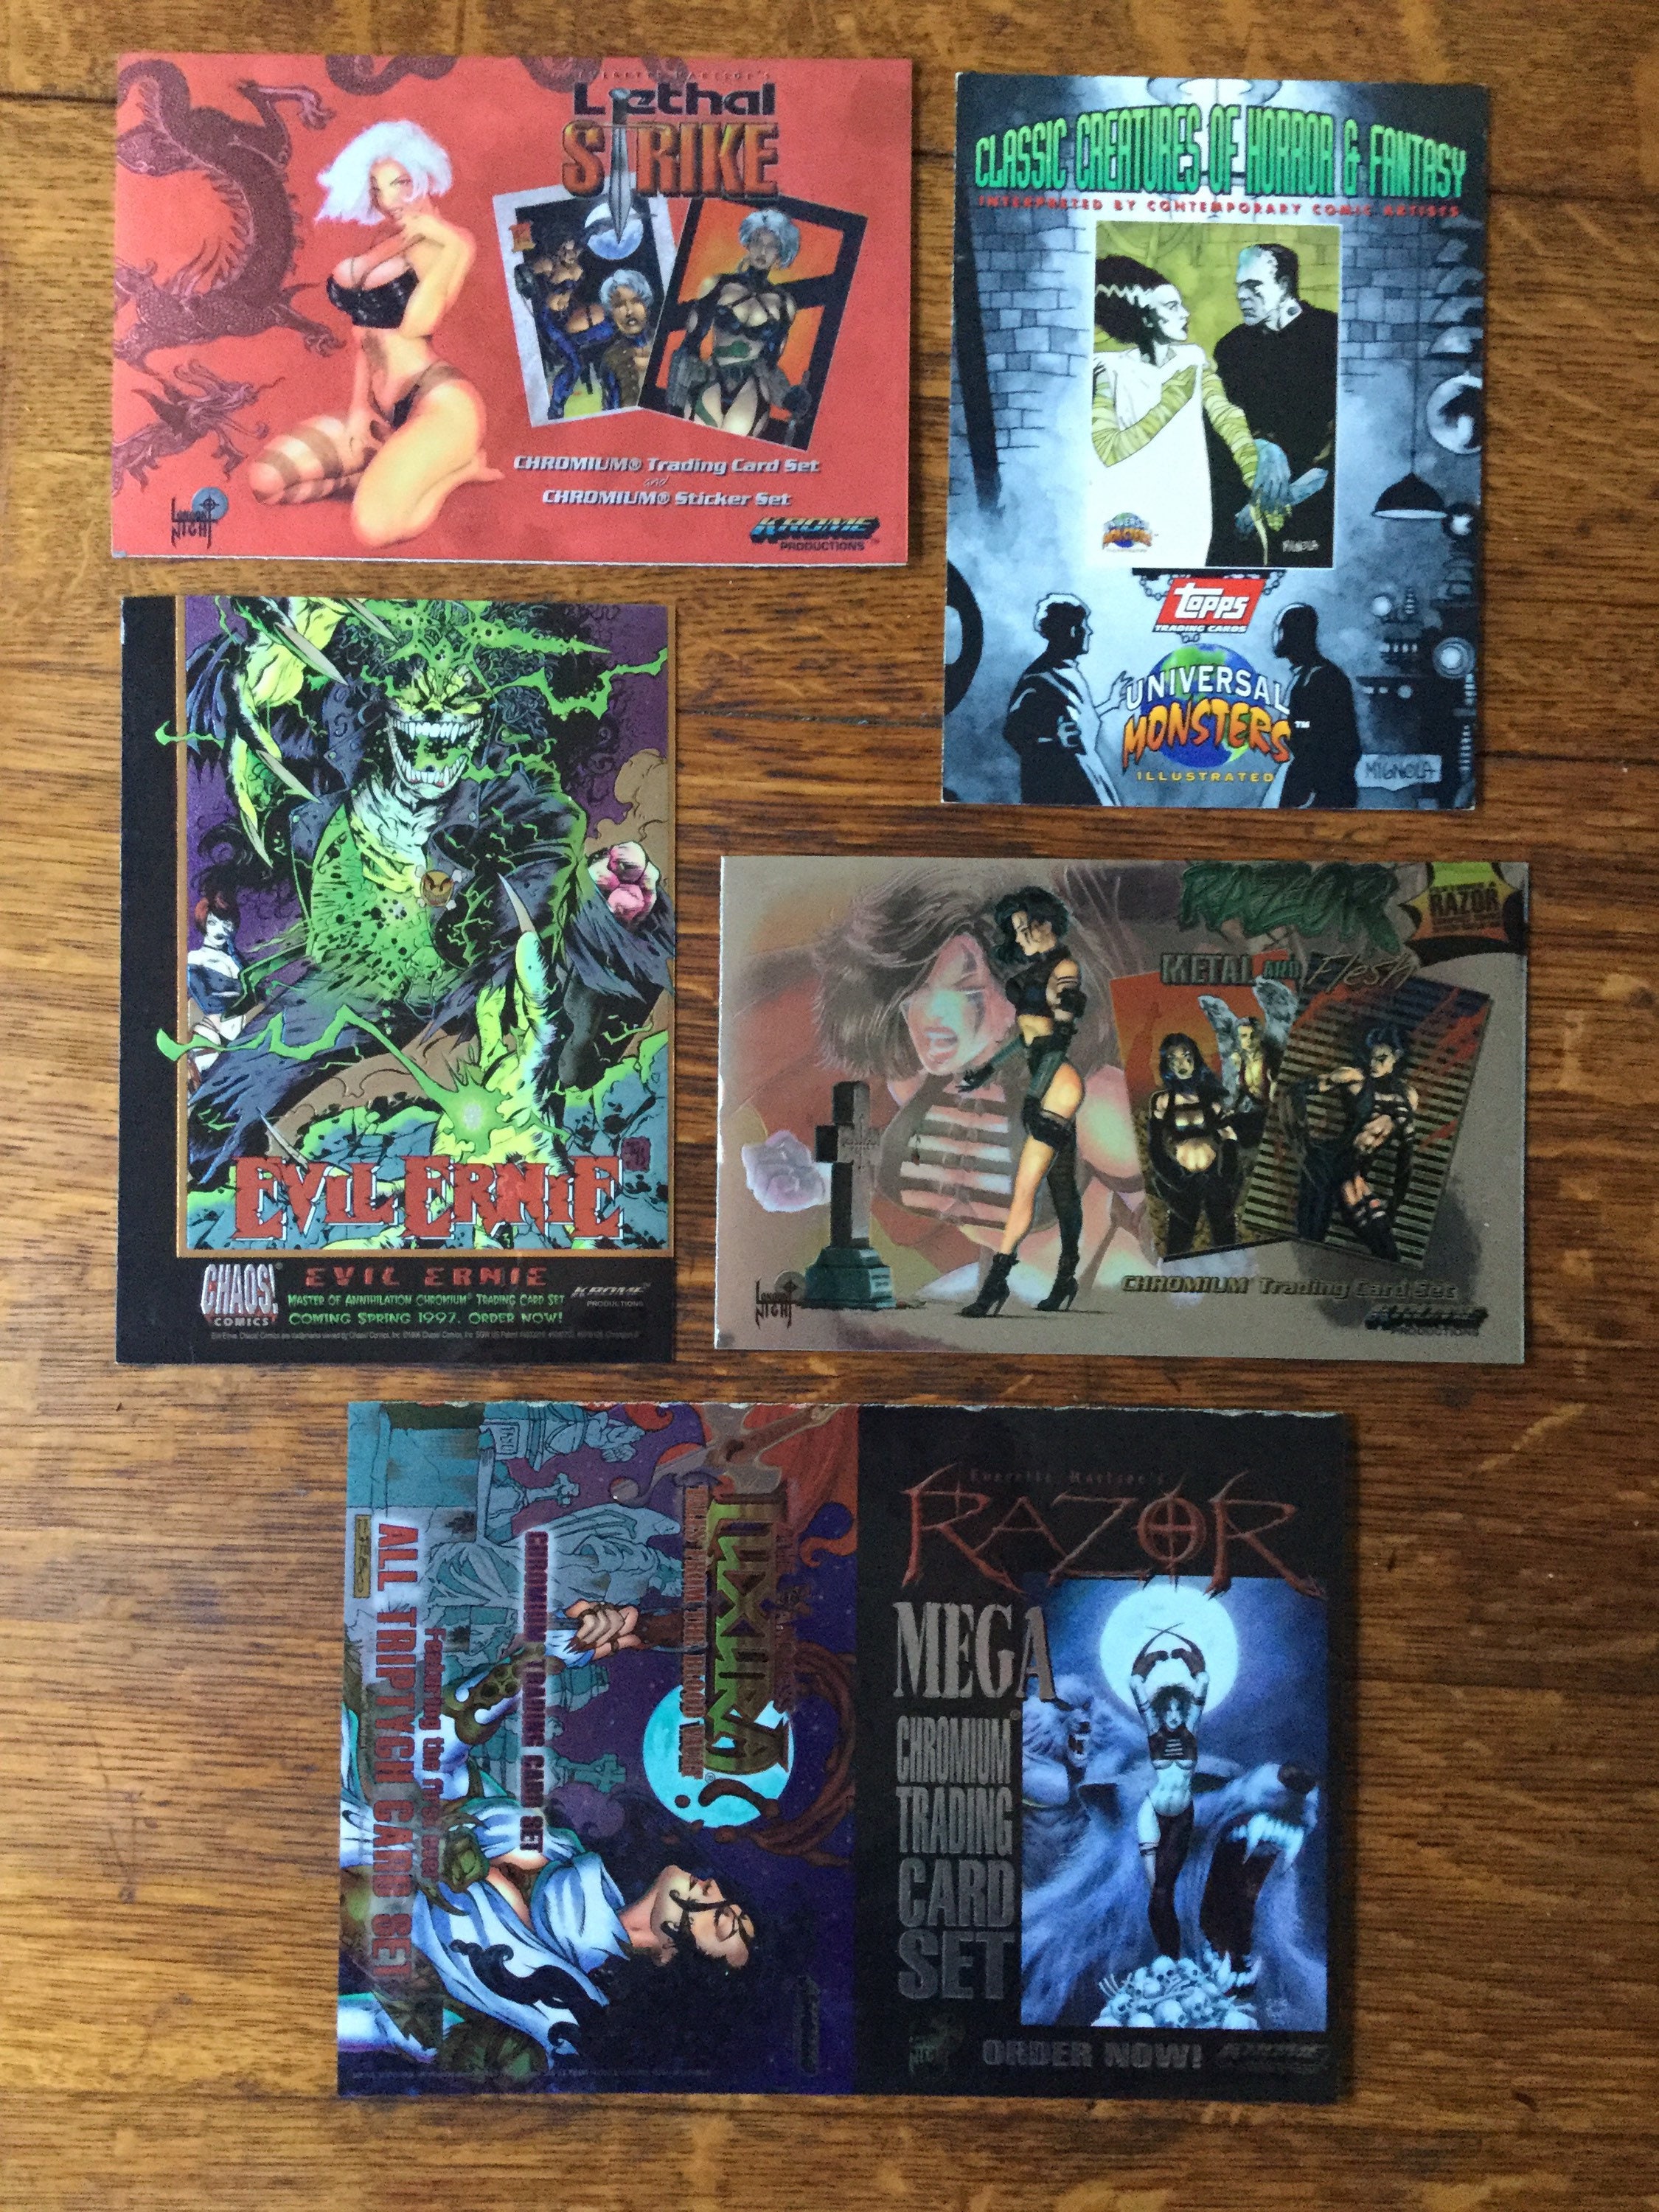 LETHAL STRIKE 1997 KROME PRODUCTIONS CHROMIUM PROMO CARD SET 1 TO 4